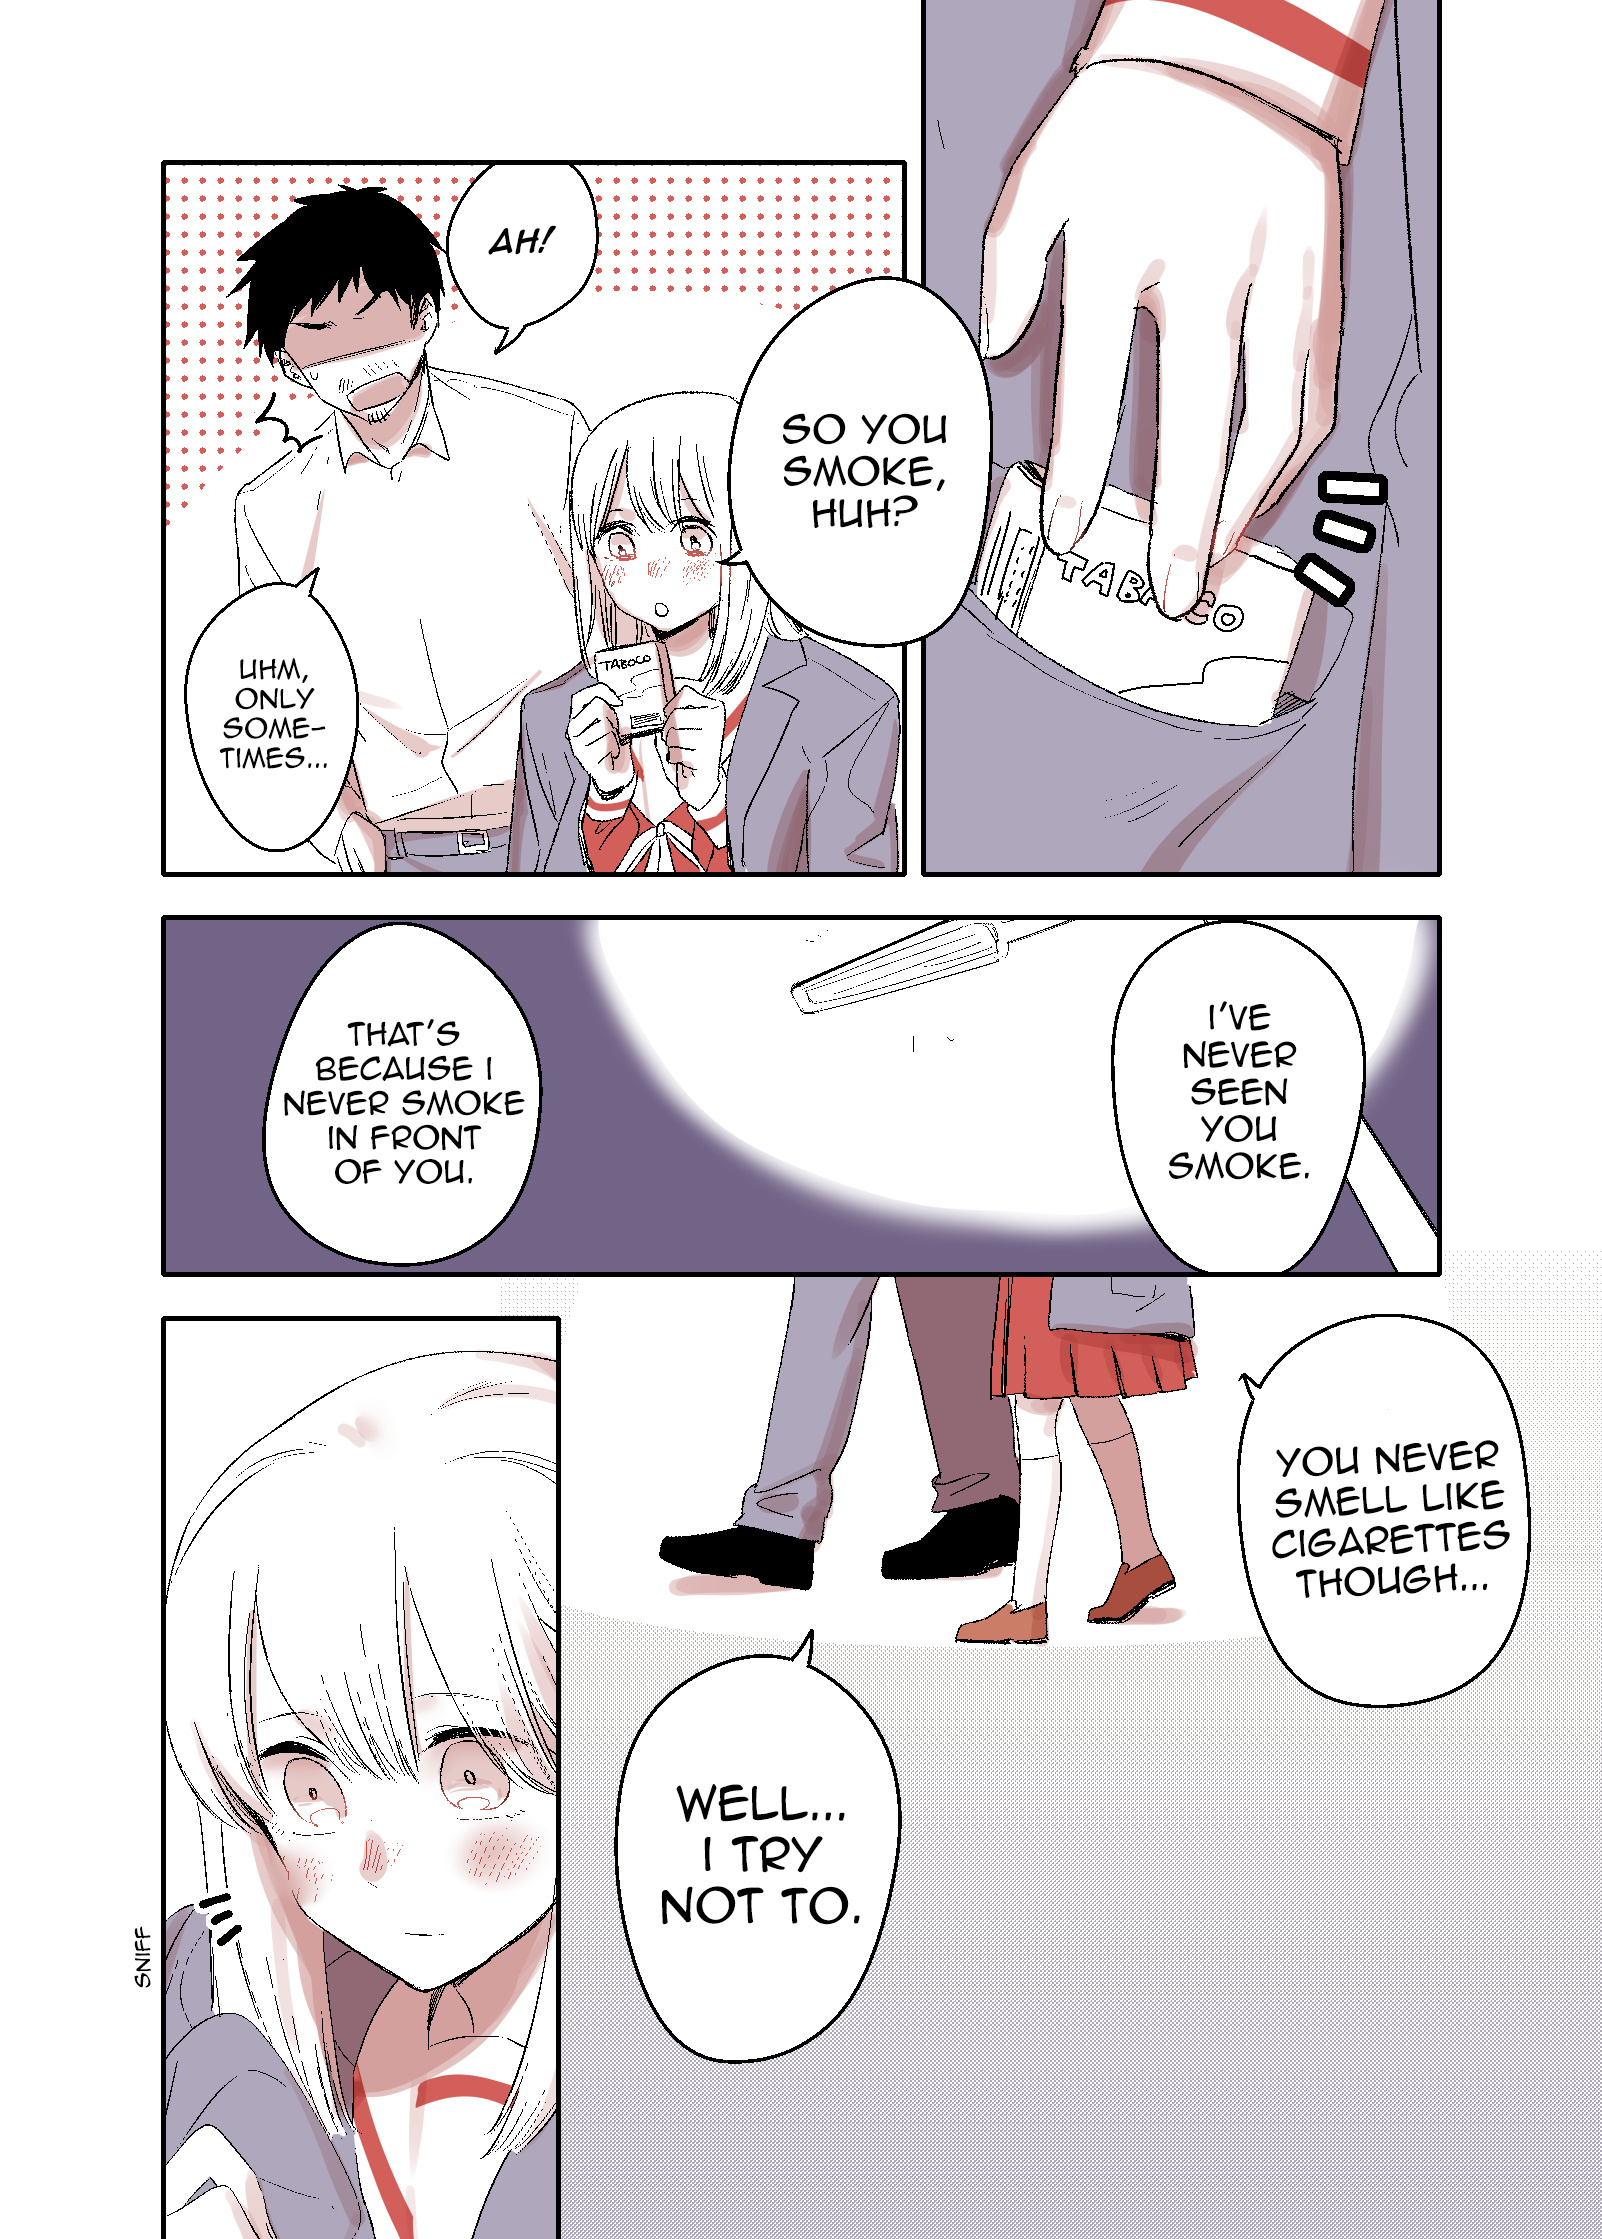 A Manga Where An Old Man Teaches Bad Things To A ●-School Girl Chapter 7 #2